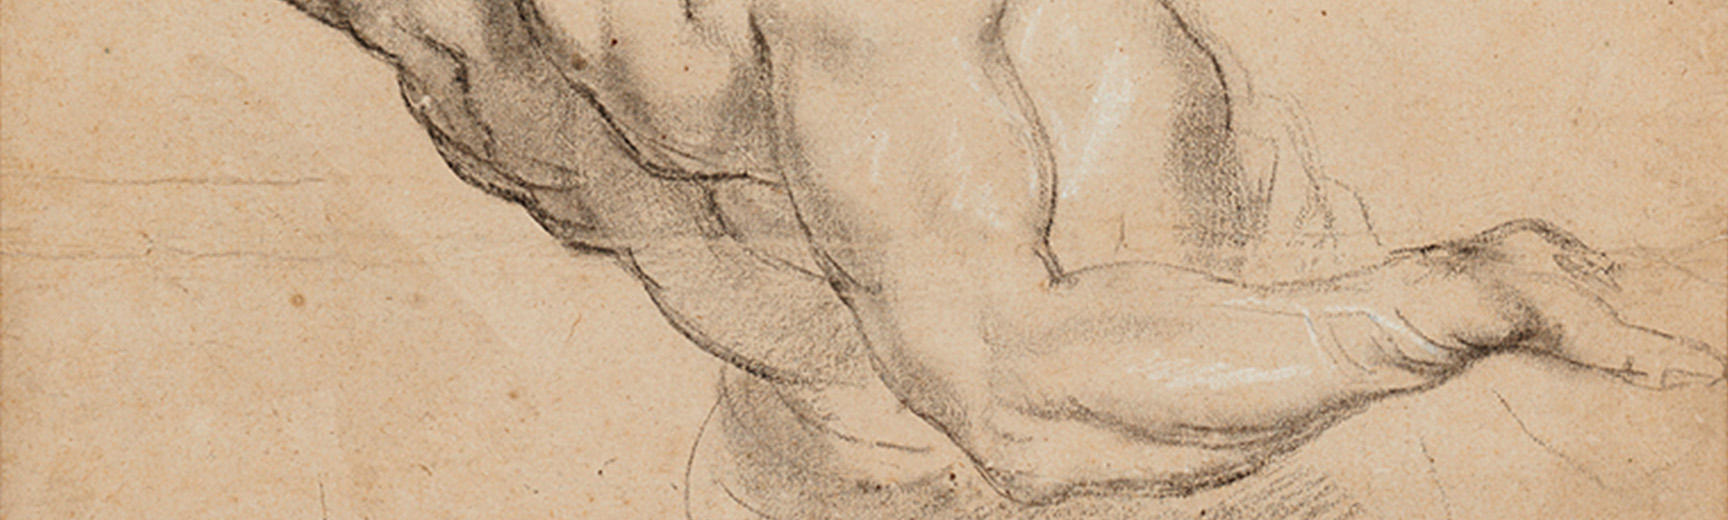 Arm and torso Flemish drawing detail